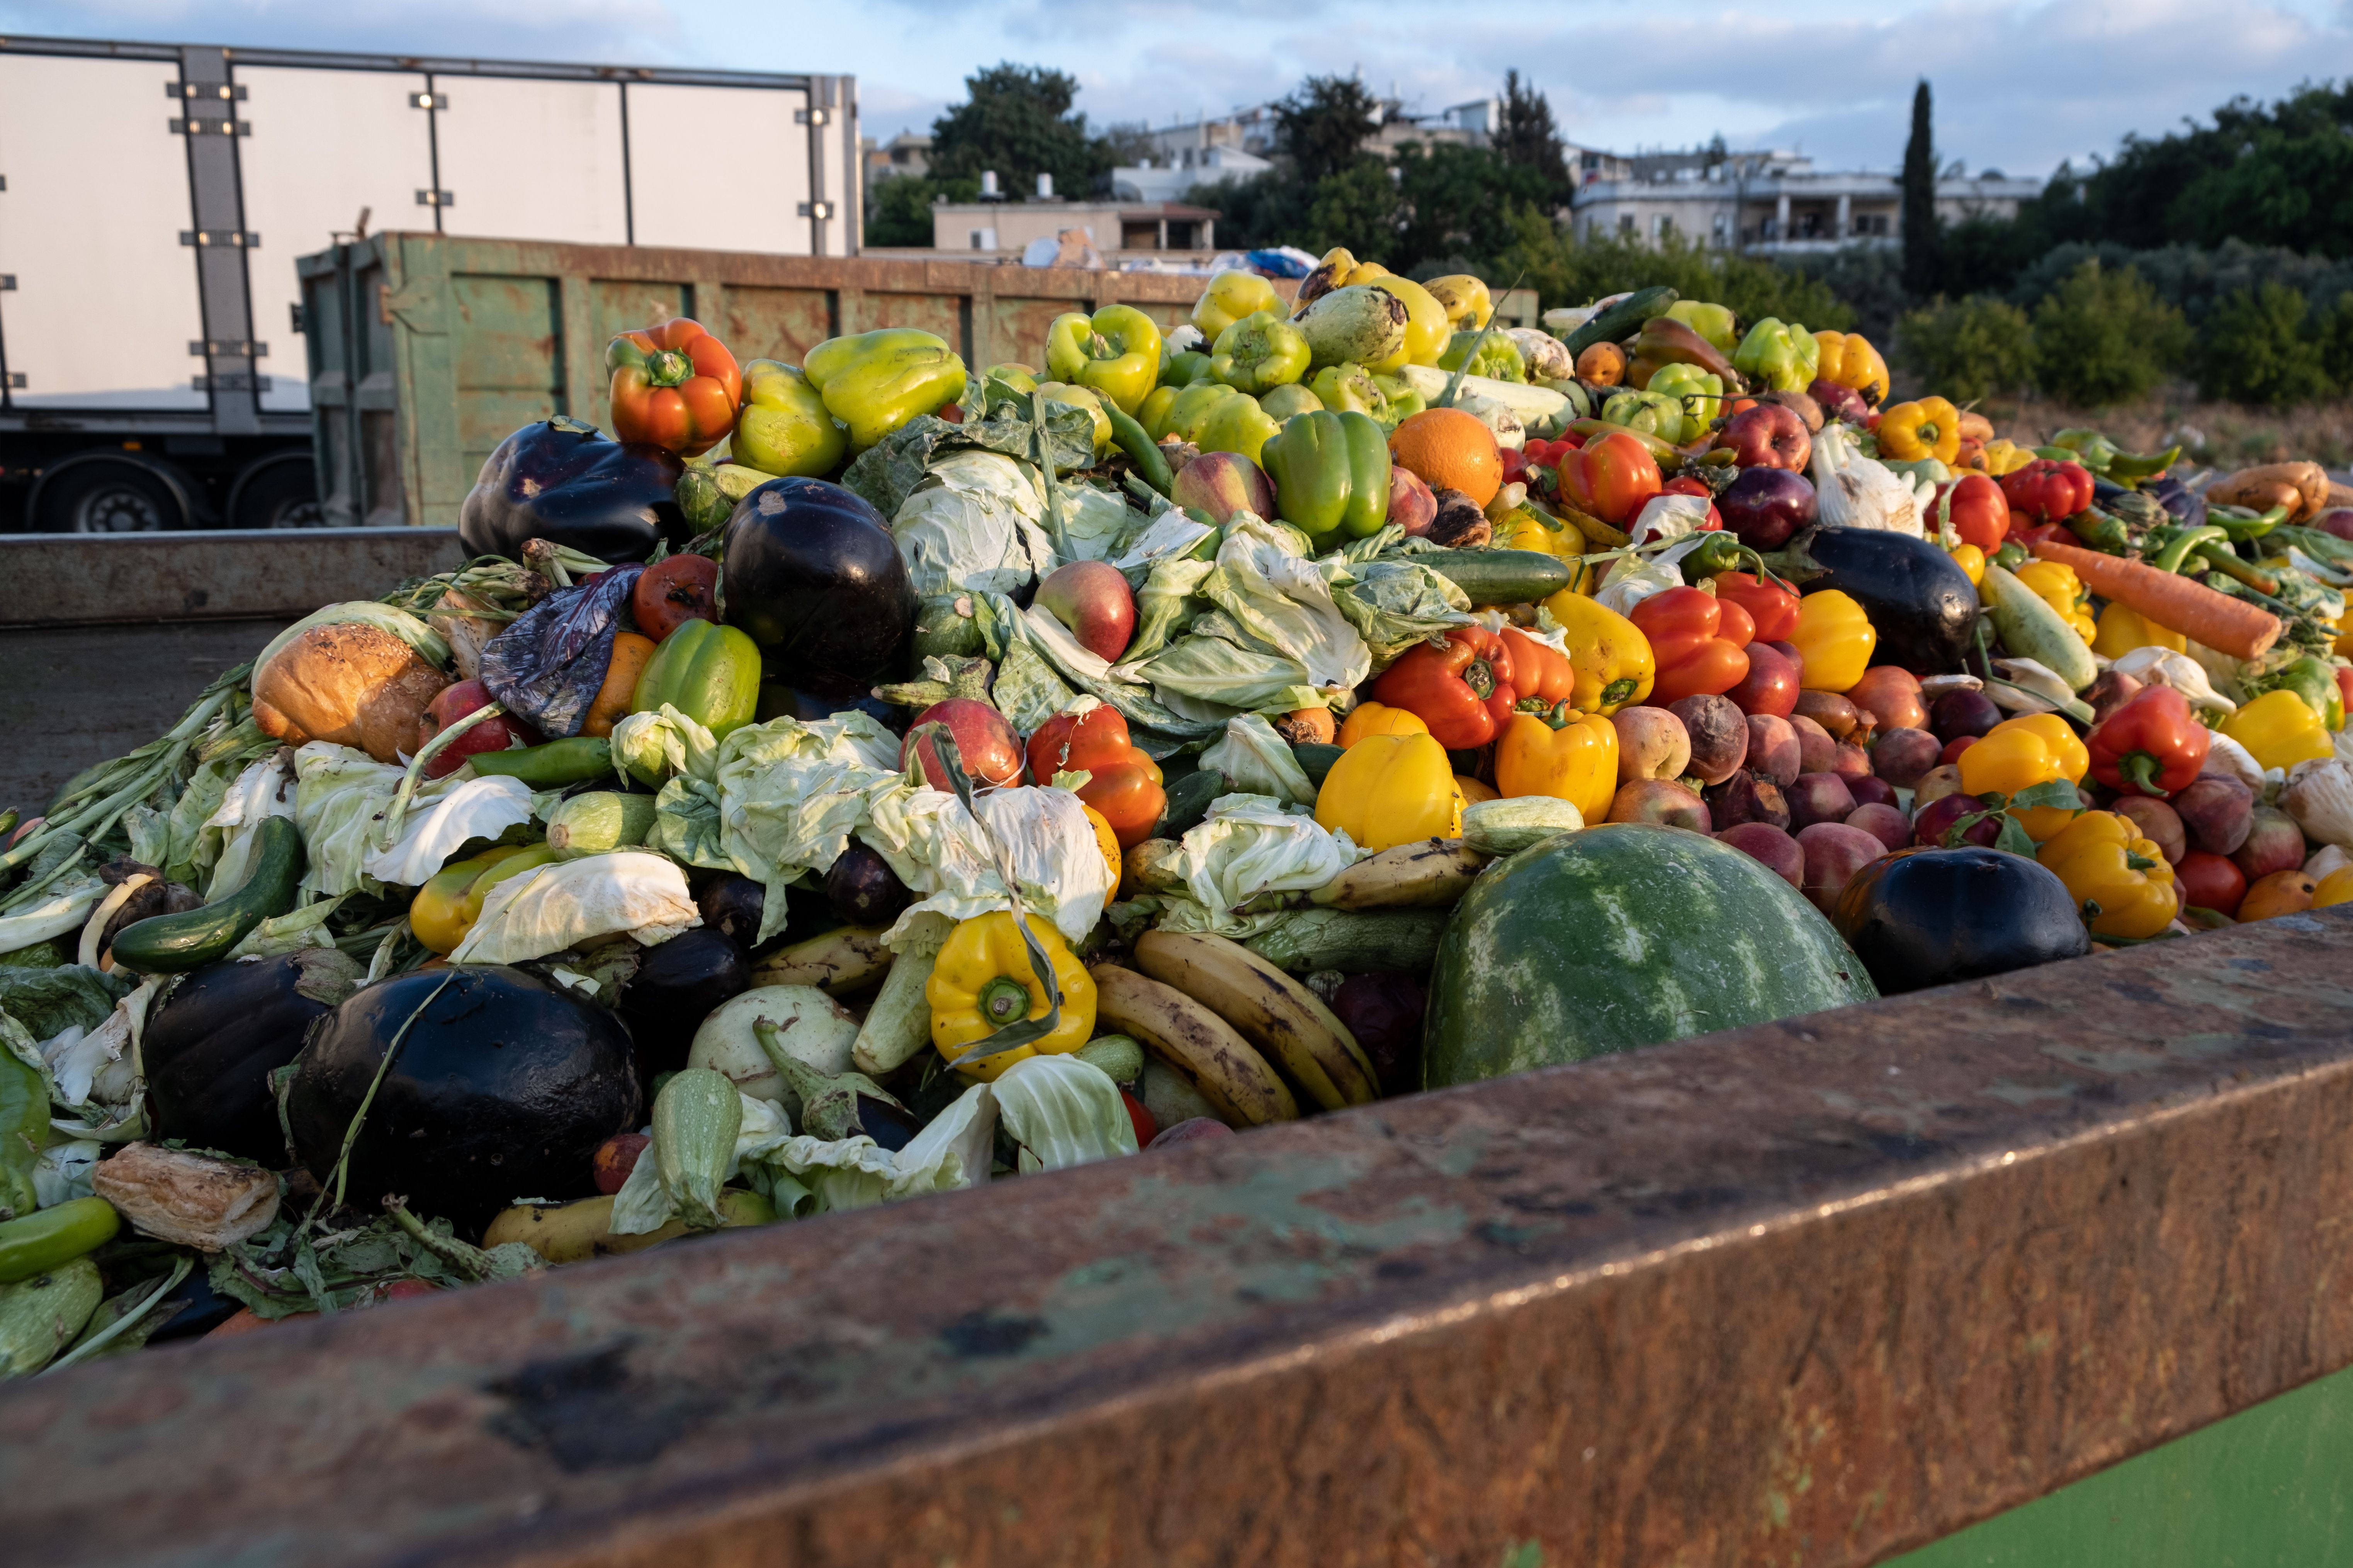 A pile of vegebles in a dumpster. 